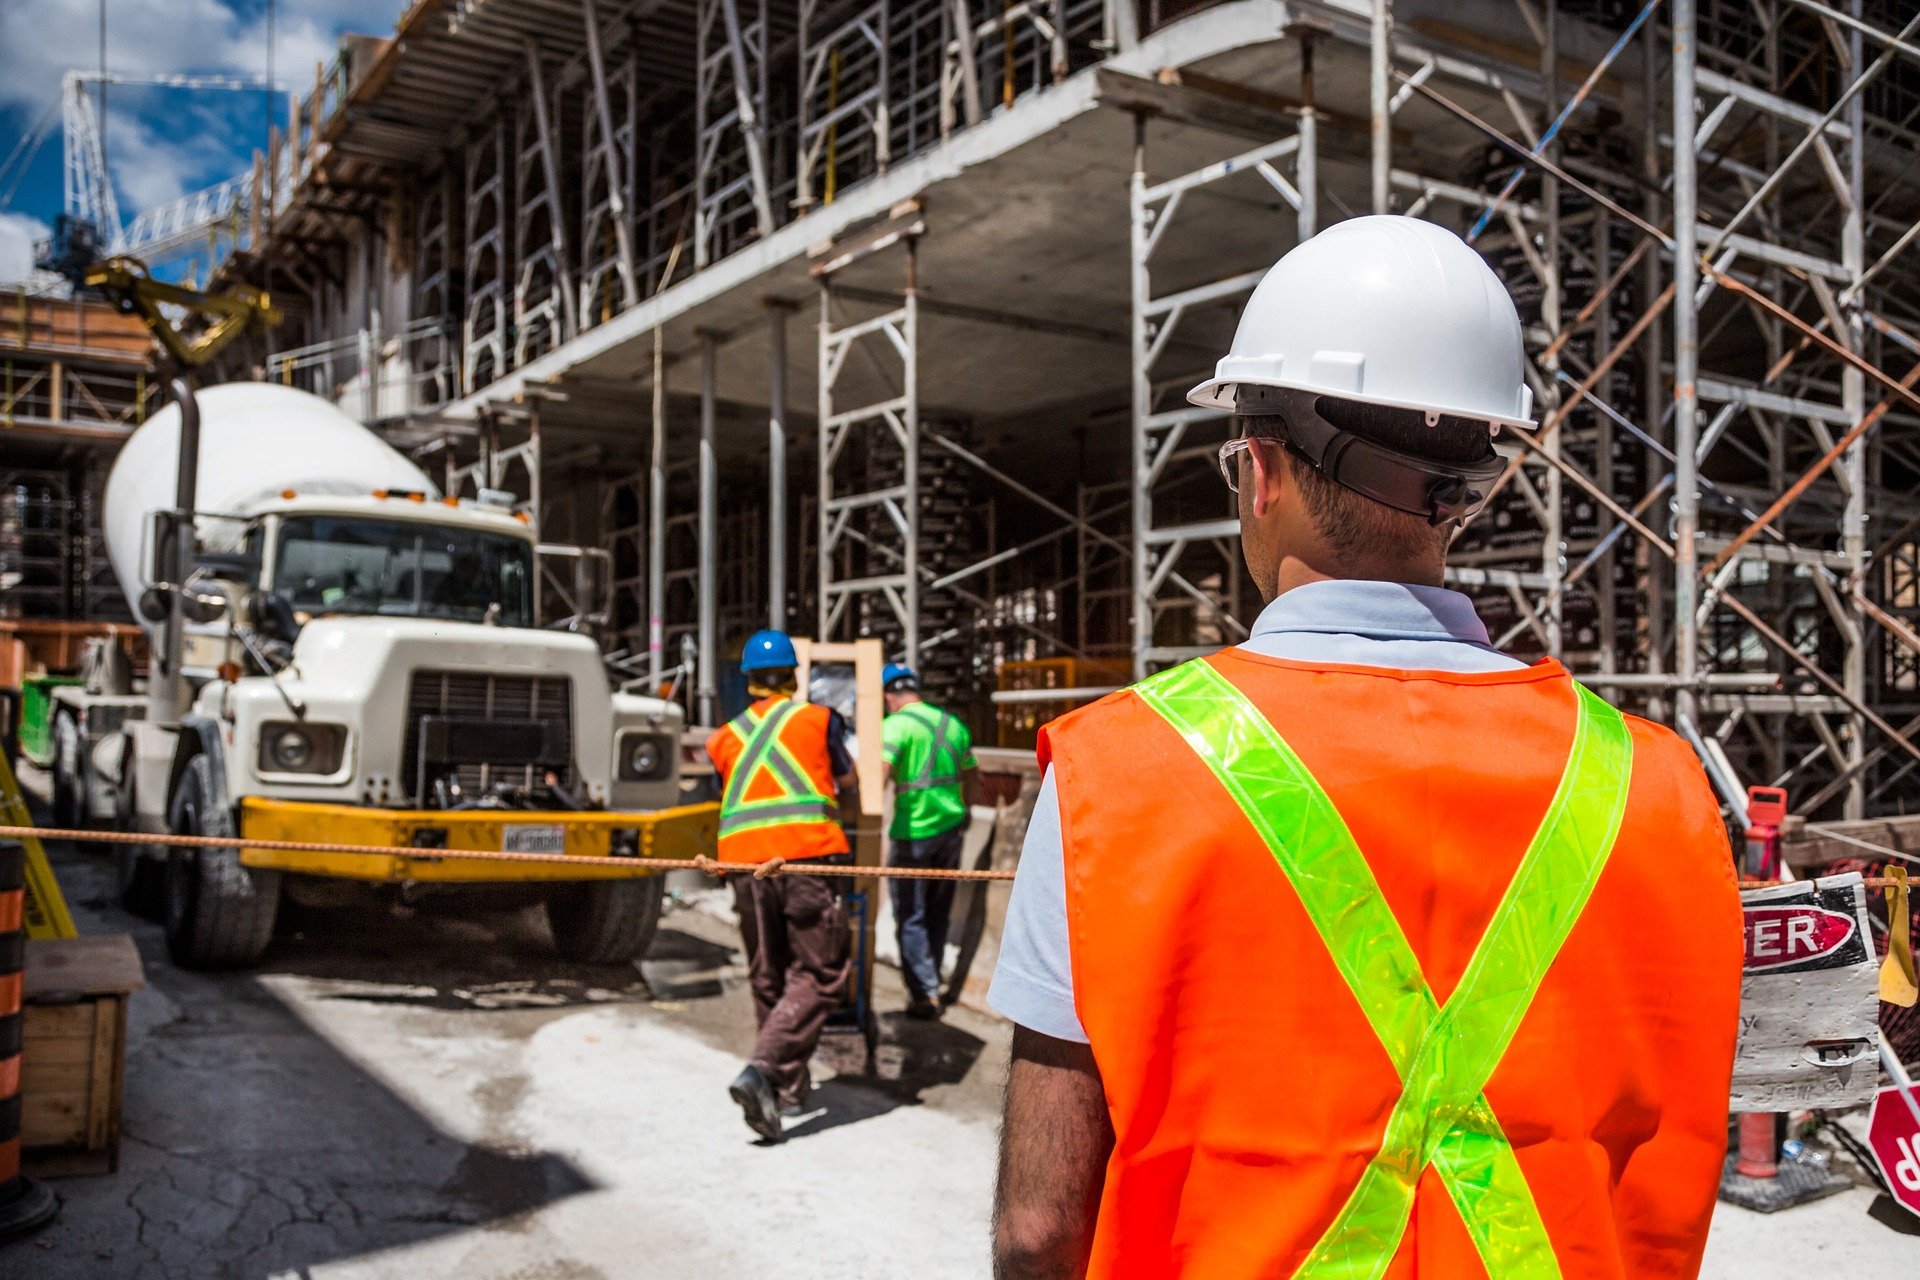 CONSTRUCTION SITE SECURITY - TOP 10 TIPS TO PROTECT YOUR SITE & PREVENT LOSSES